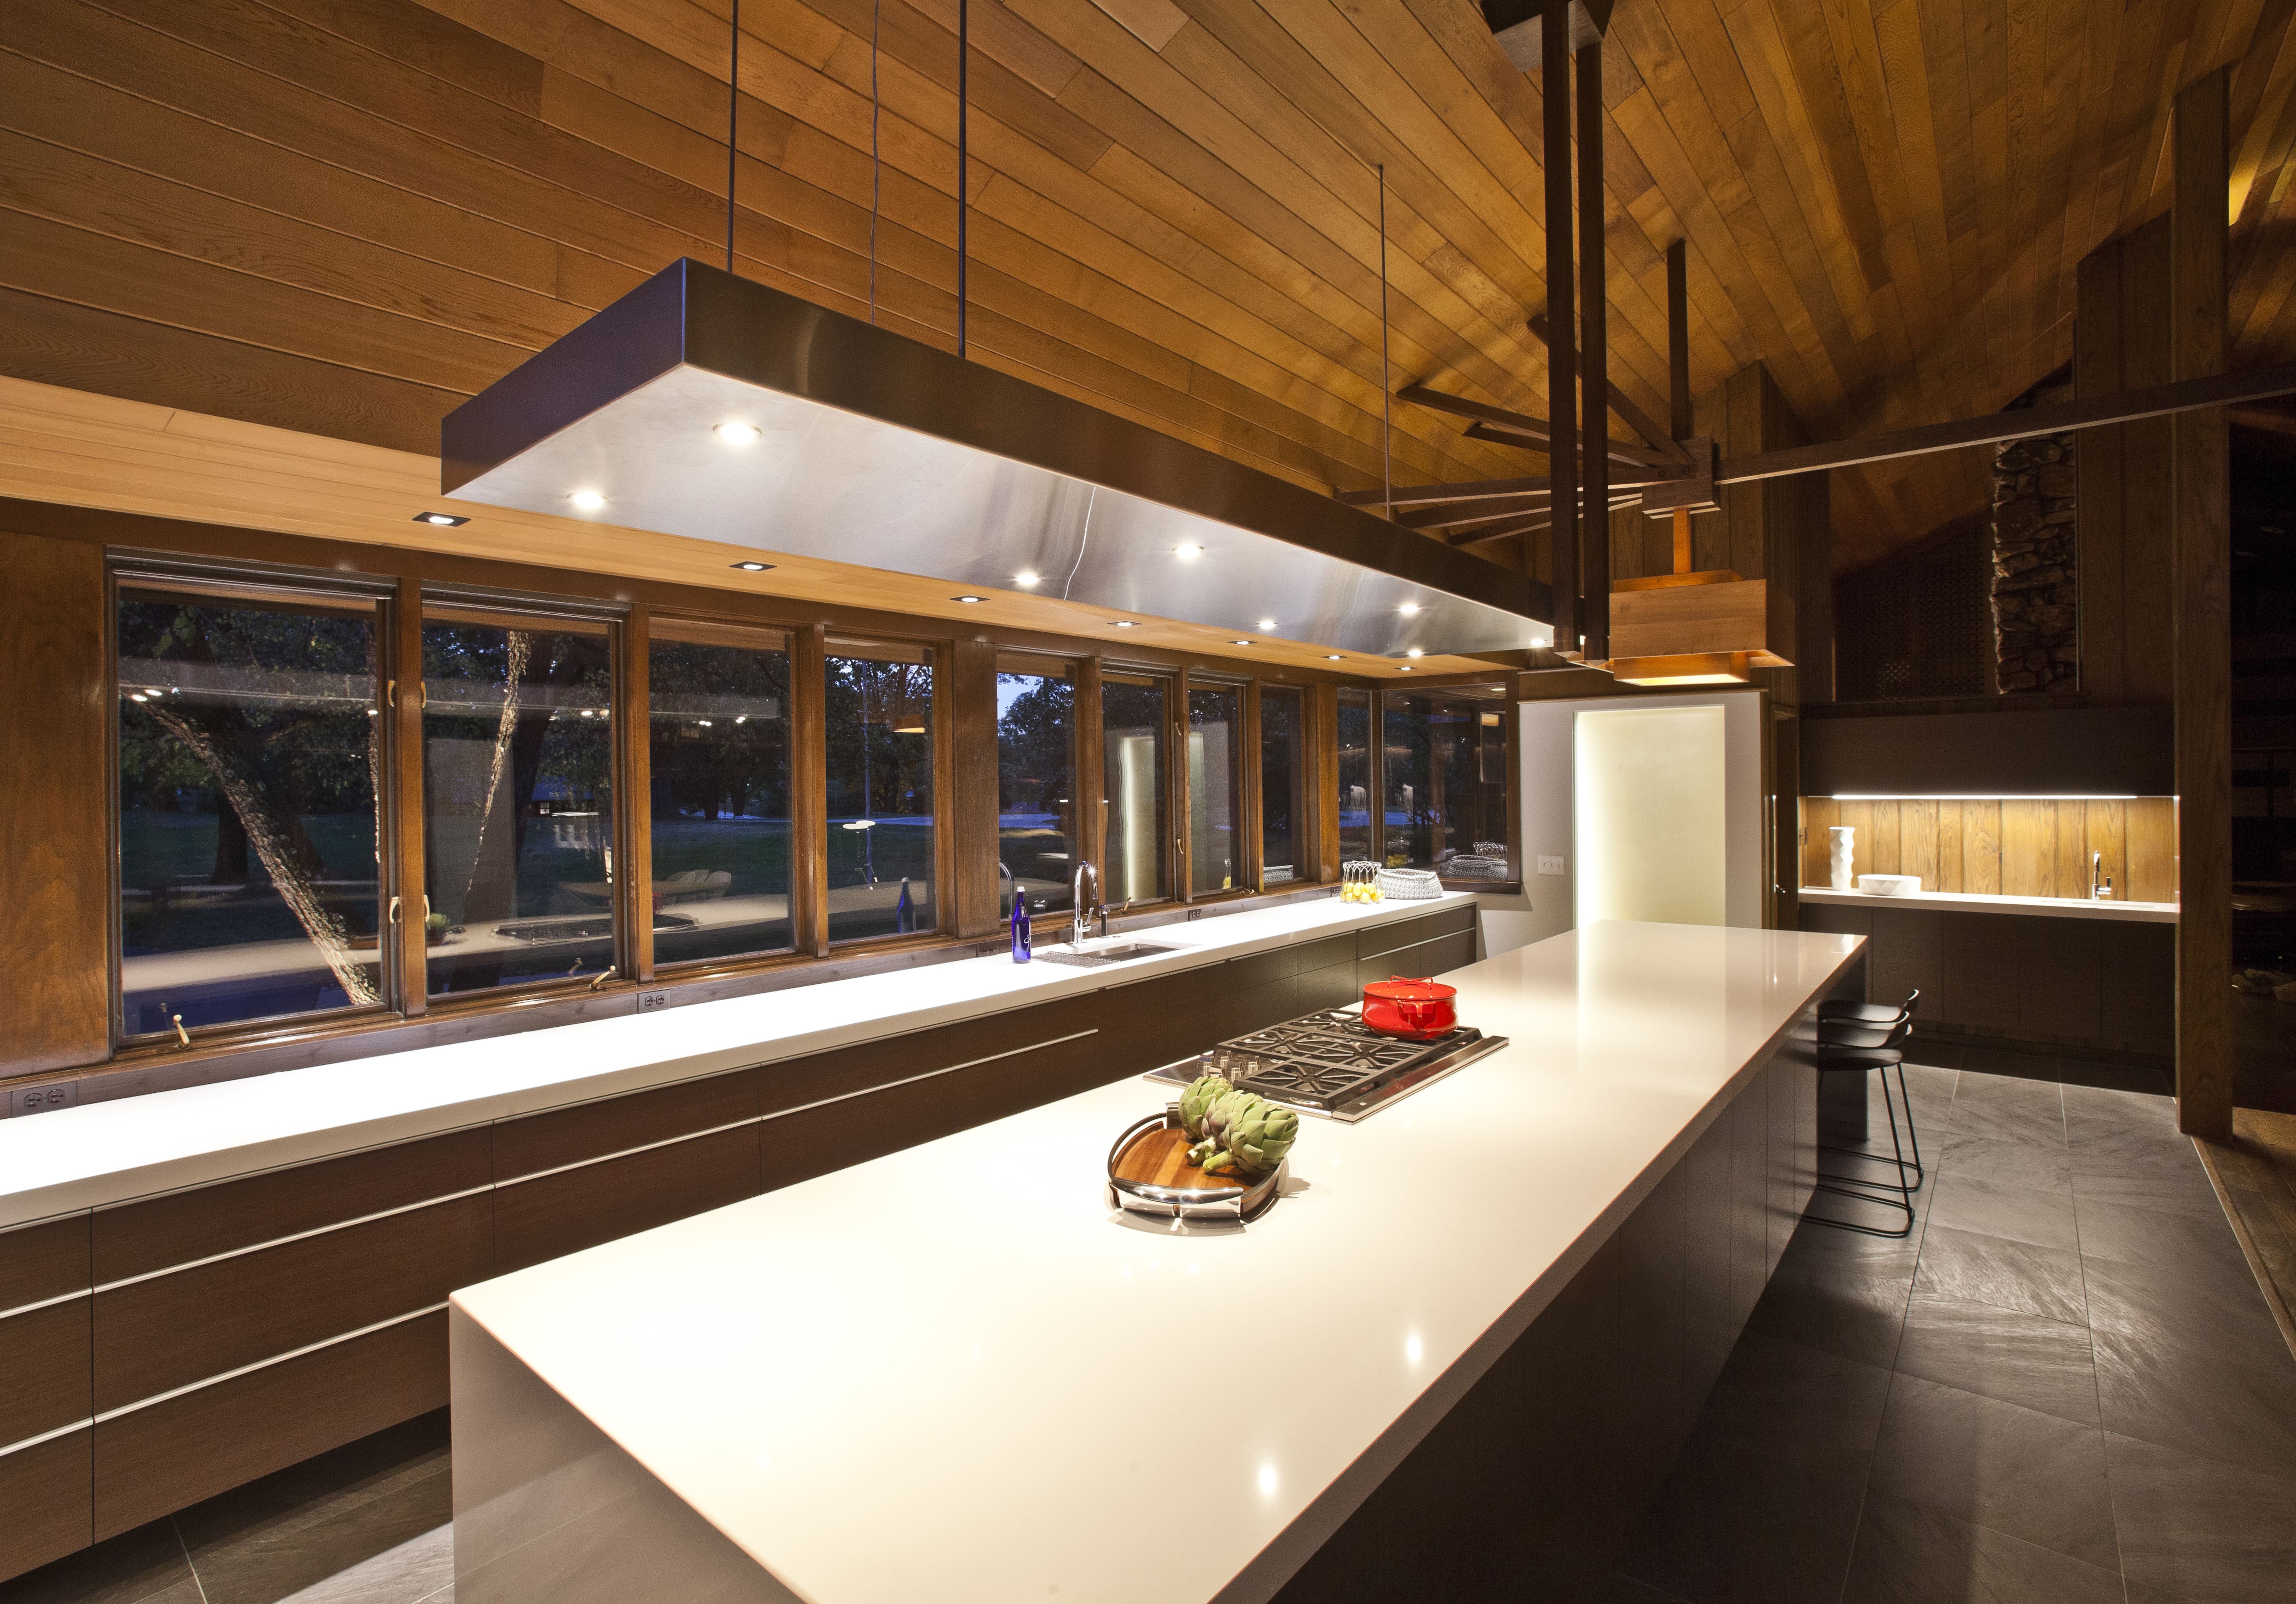 Island lighting detail showing the nighttime experience of this custom kitchen designed by interior designer, RM Interiors of Cincinnati, Oh.